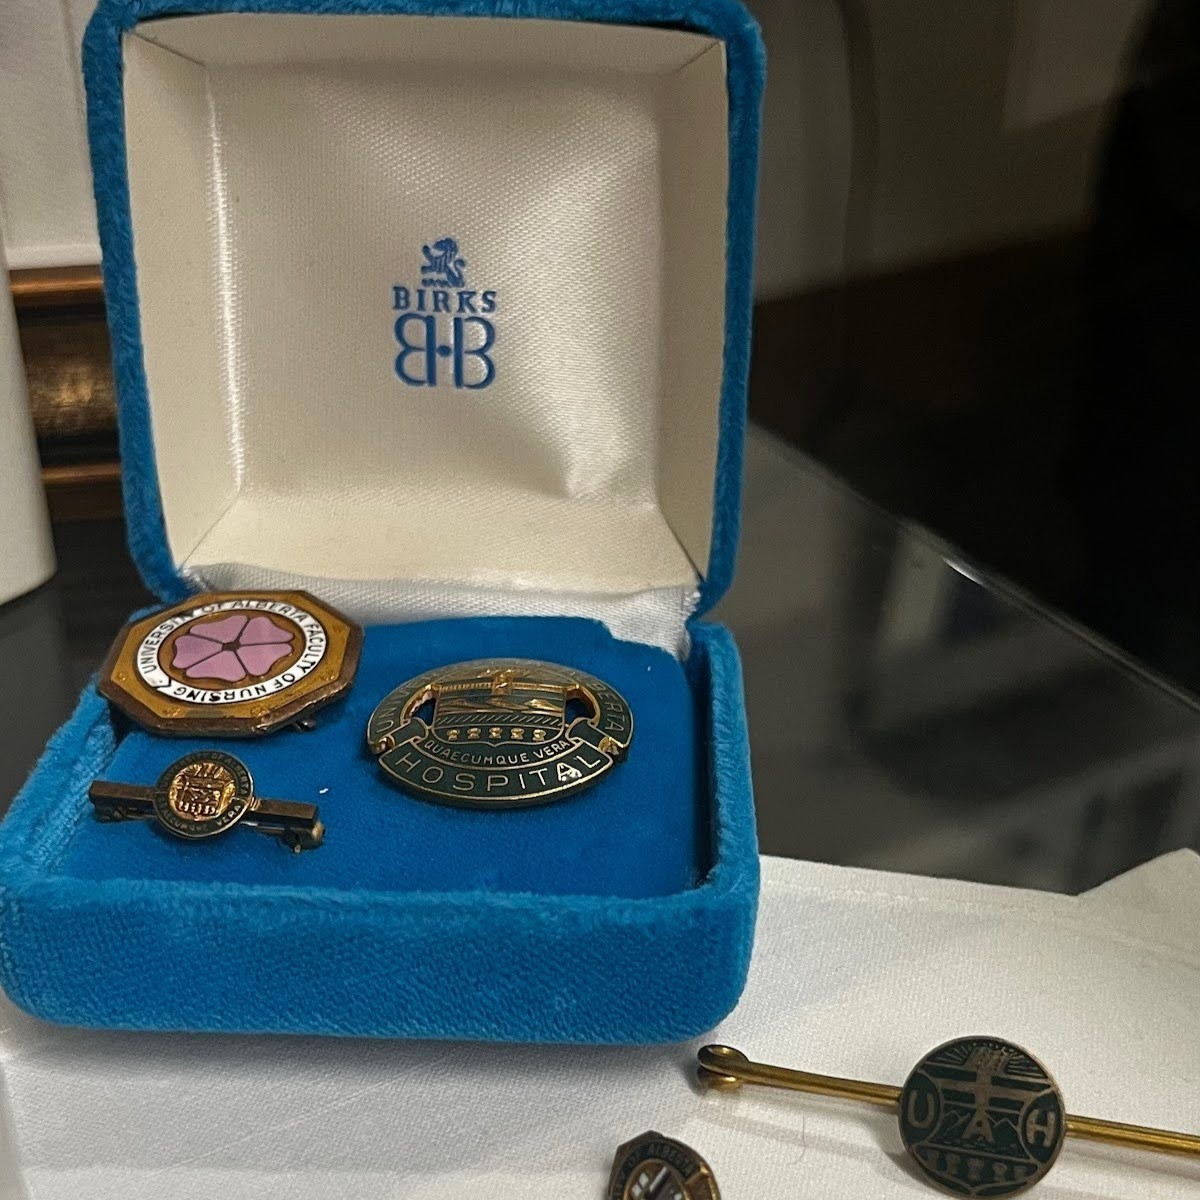 Celebrating National Nursing Week with pride and nostalgia! Join us in reminiscing about our cherished U of A nursing pins from throughout the years 

They reflect our history and dedication to nursing excellence. 

#NationalNursingWeek2024 #UAlbertaNursing #UAlberta